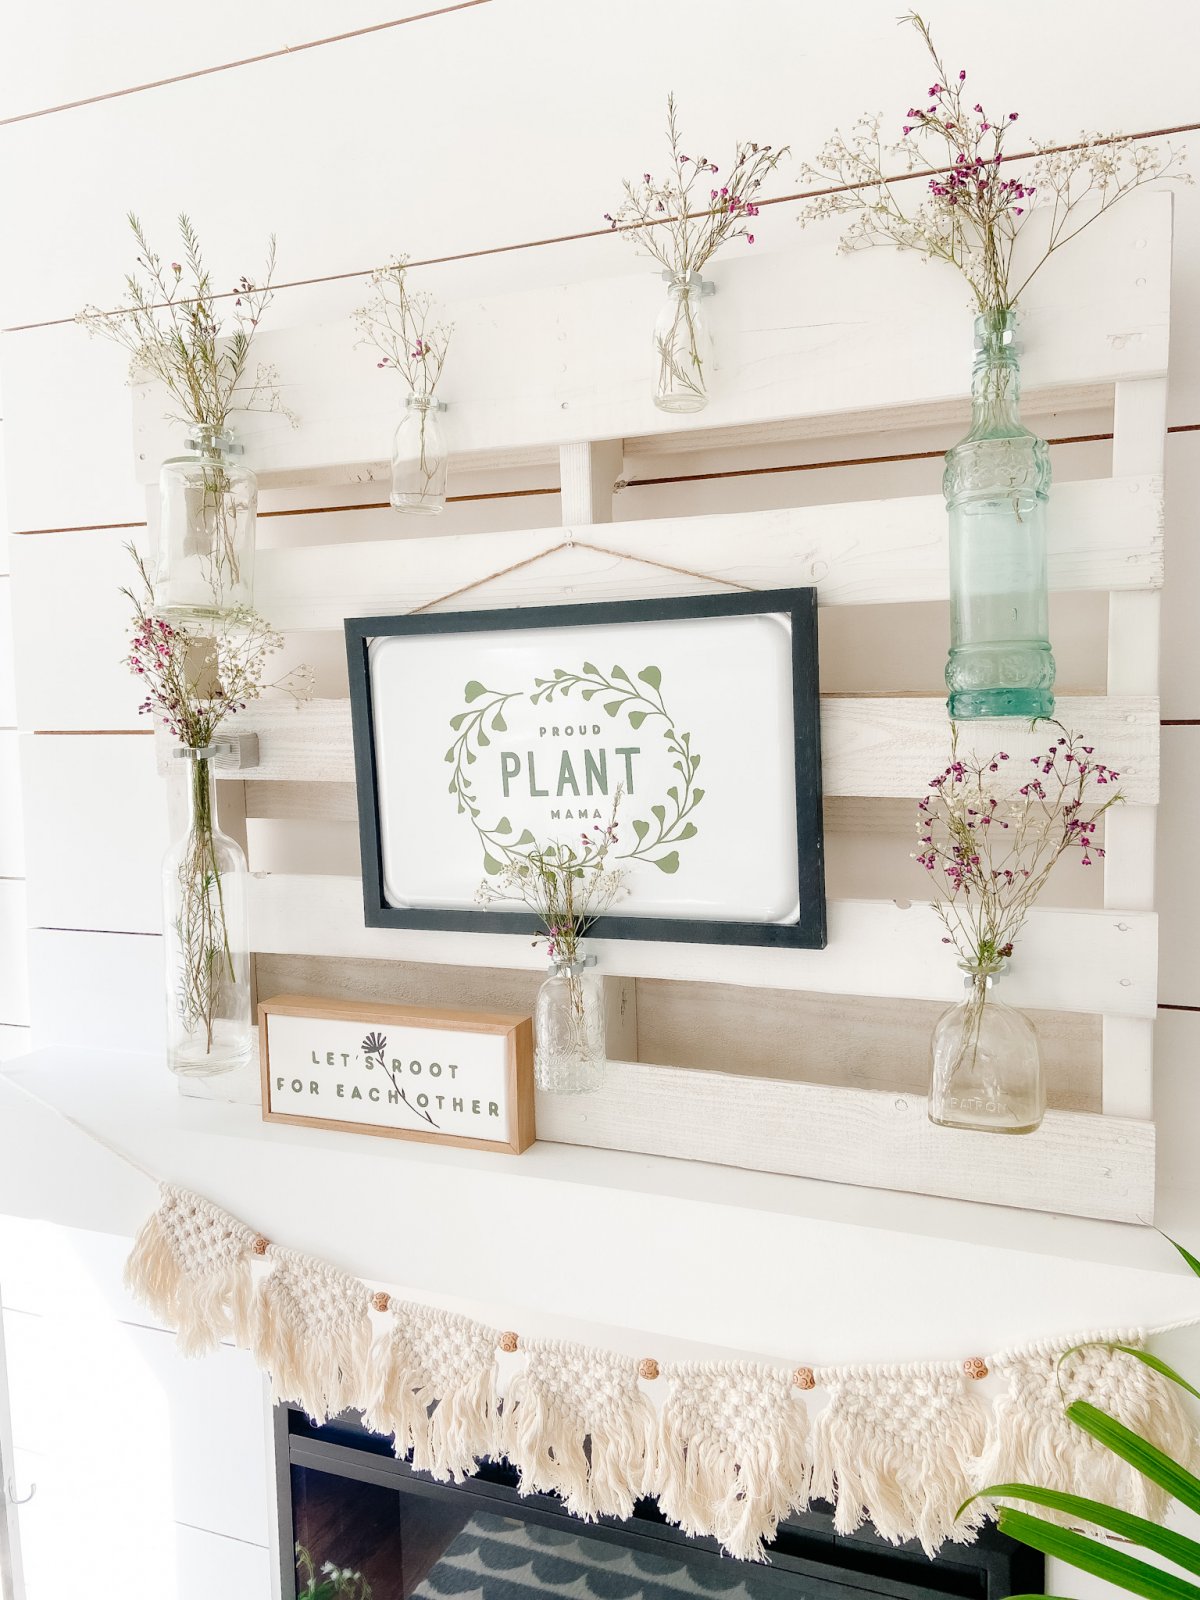 upcycled pallet flower display